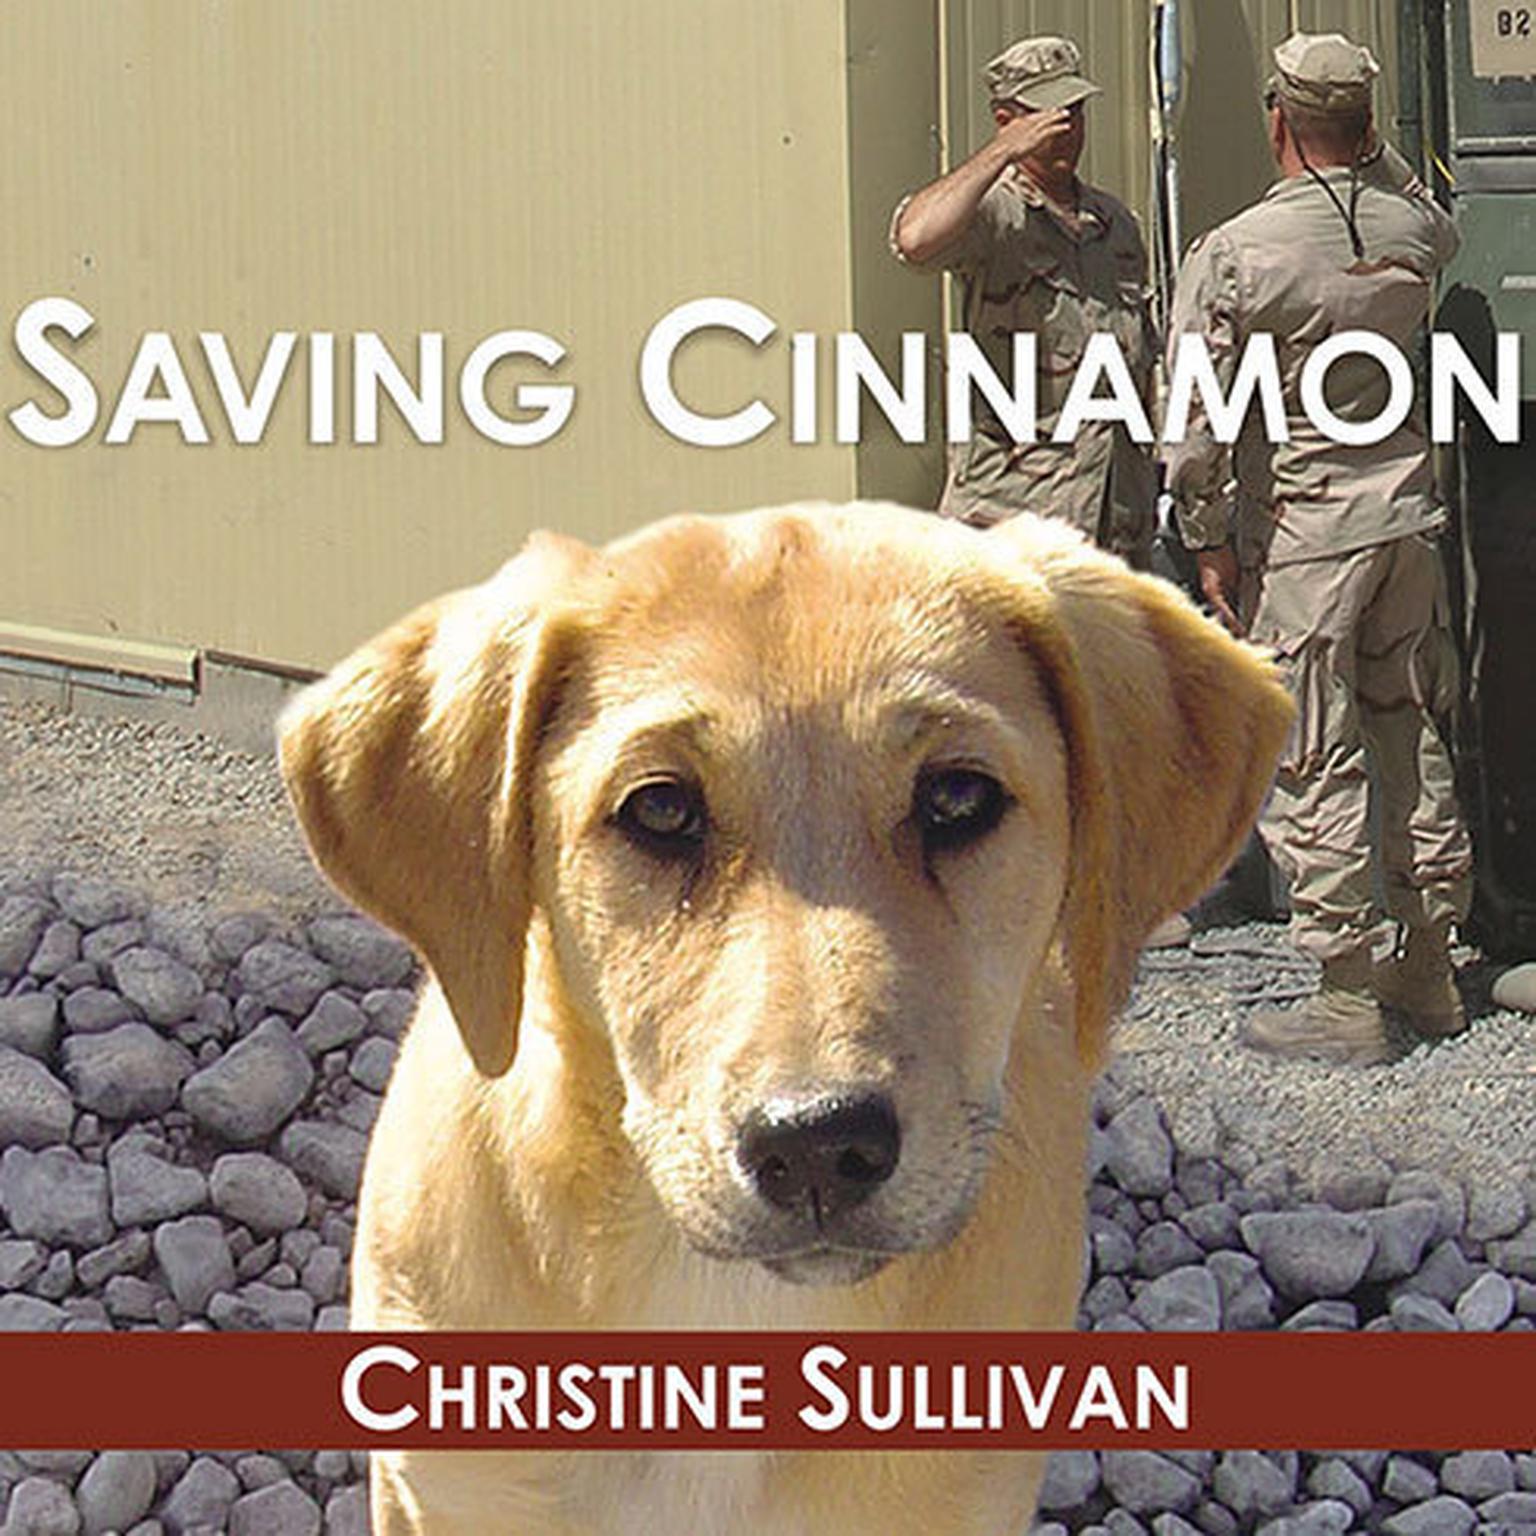 Saving Cinnamon: The Amazing True Story of a Missing Military Puppy and the Desperate Mission to Bring Her Home Audiobook, by Christine Sullivan